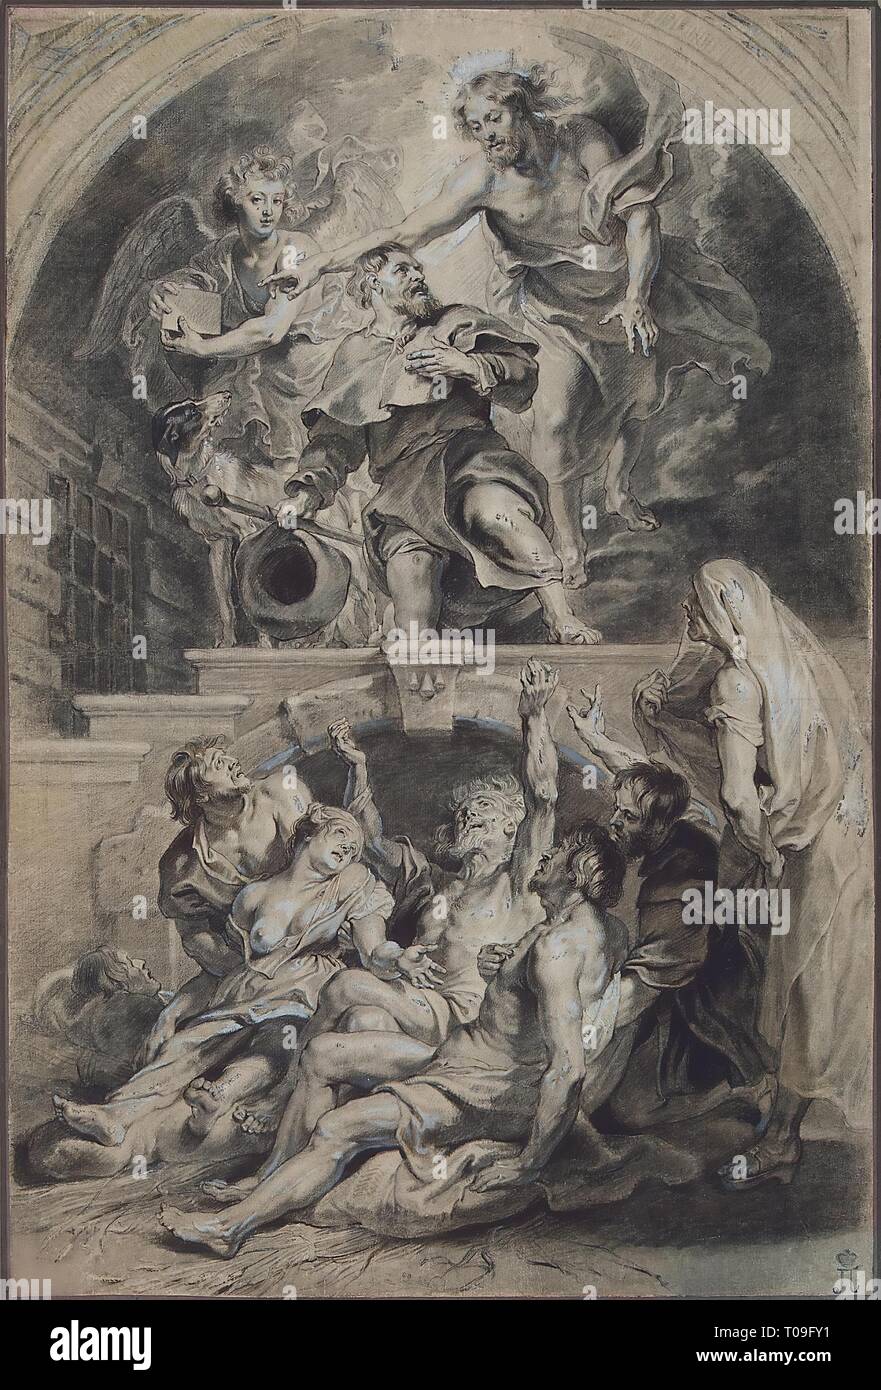 'St Roche, Patron of the Lepers'. Flanders, Circa 1625. Dimensions: 52,6x35,8 cm. Museum: State Hermitage, St. Petersburg. Author: Peter Paul Rubens (Pietro Pauolo) (attributed). after Sir Peter Paul Rubens Paulus Pontius. Stock Photo